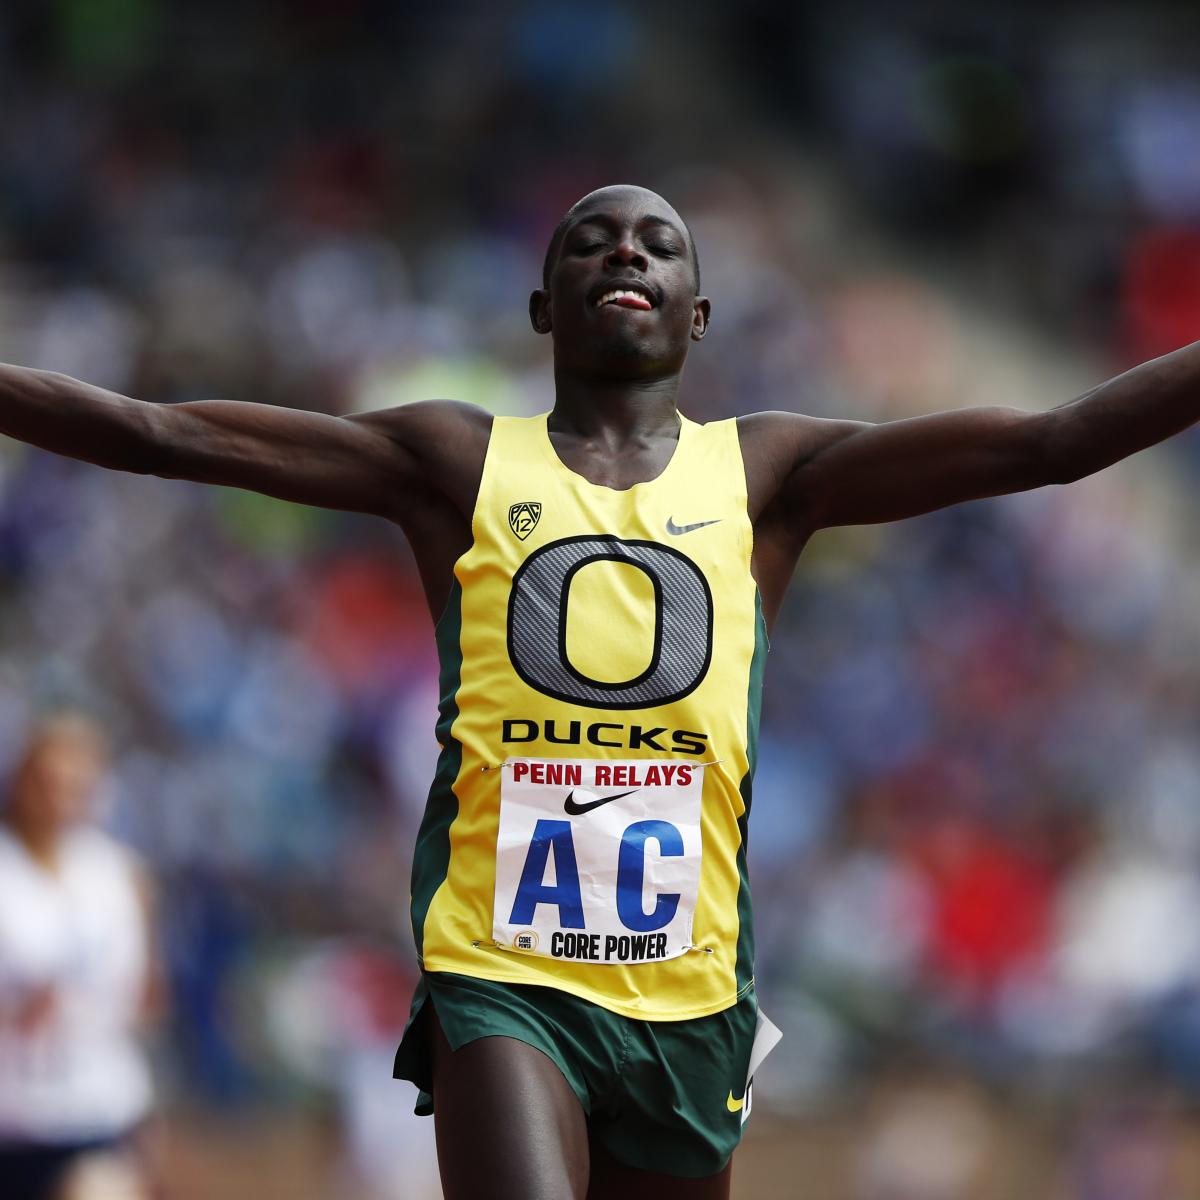 NCAA Indoor Track & Field Championships 2015 Results and Twitter